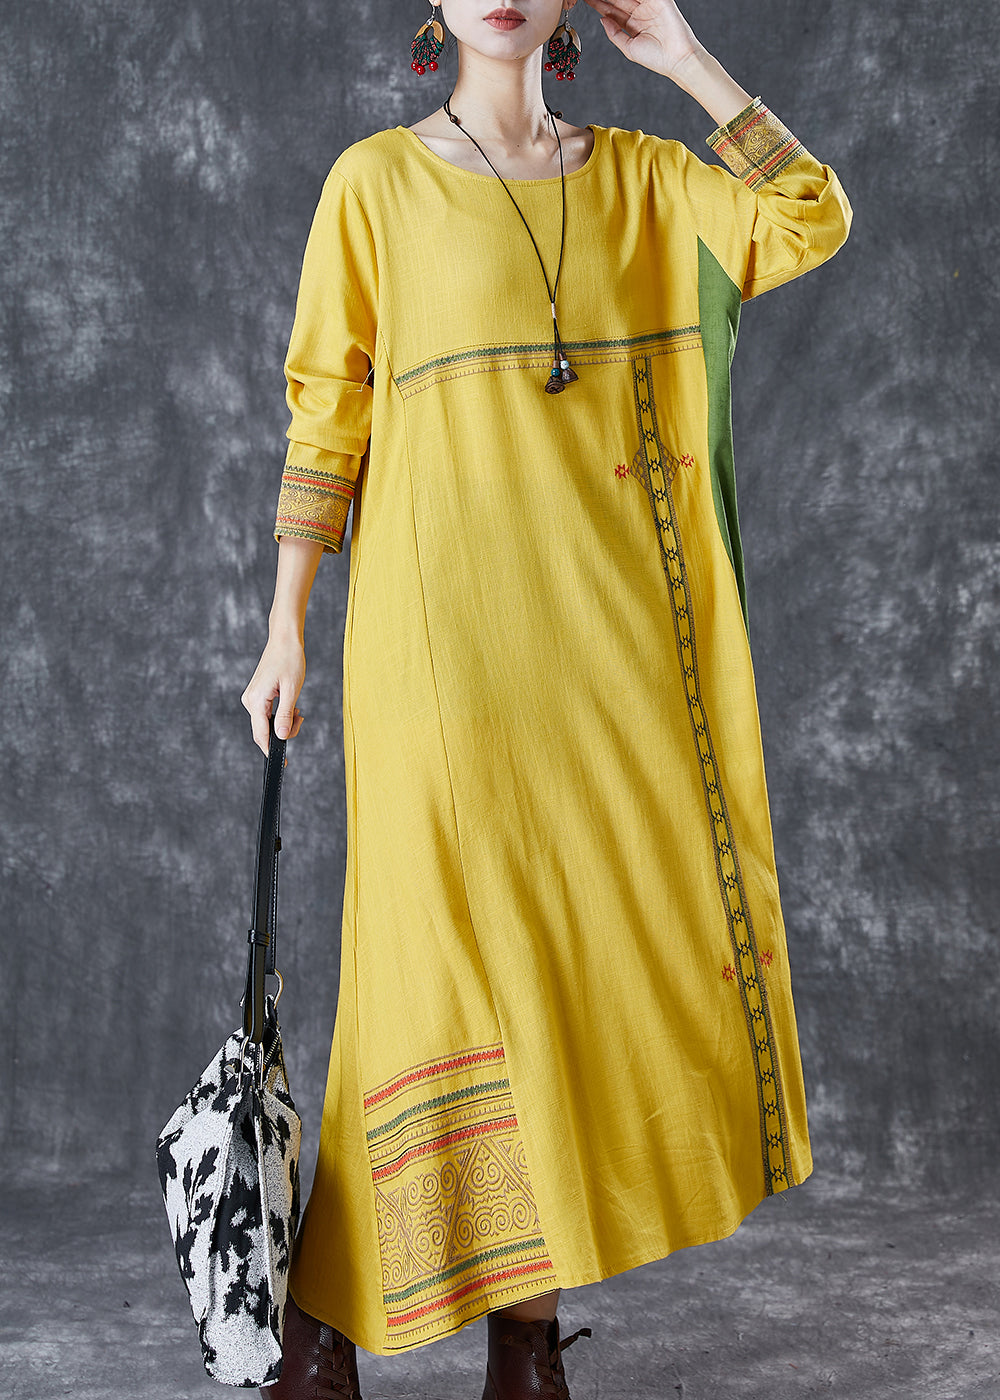 Modern Yellow Embroideried Patchwork Linen Maxi Dresses Spring